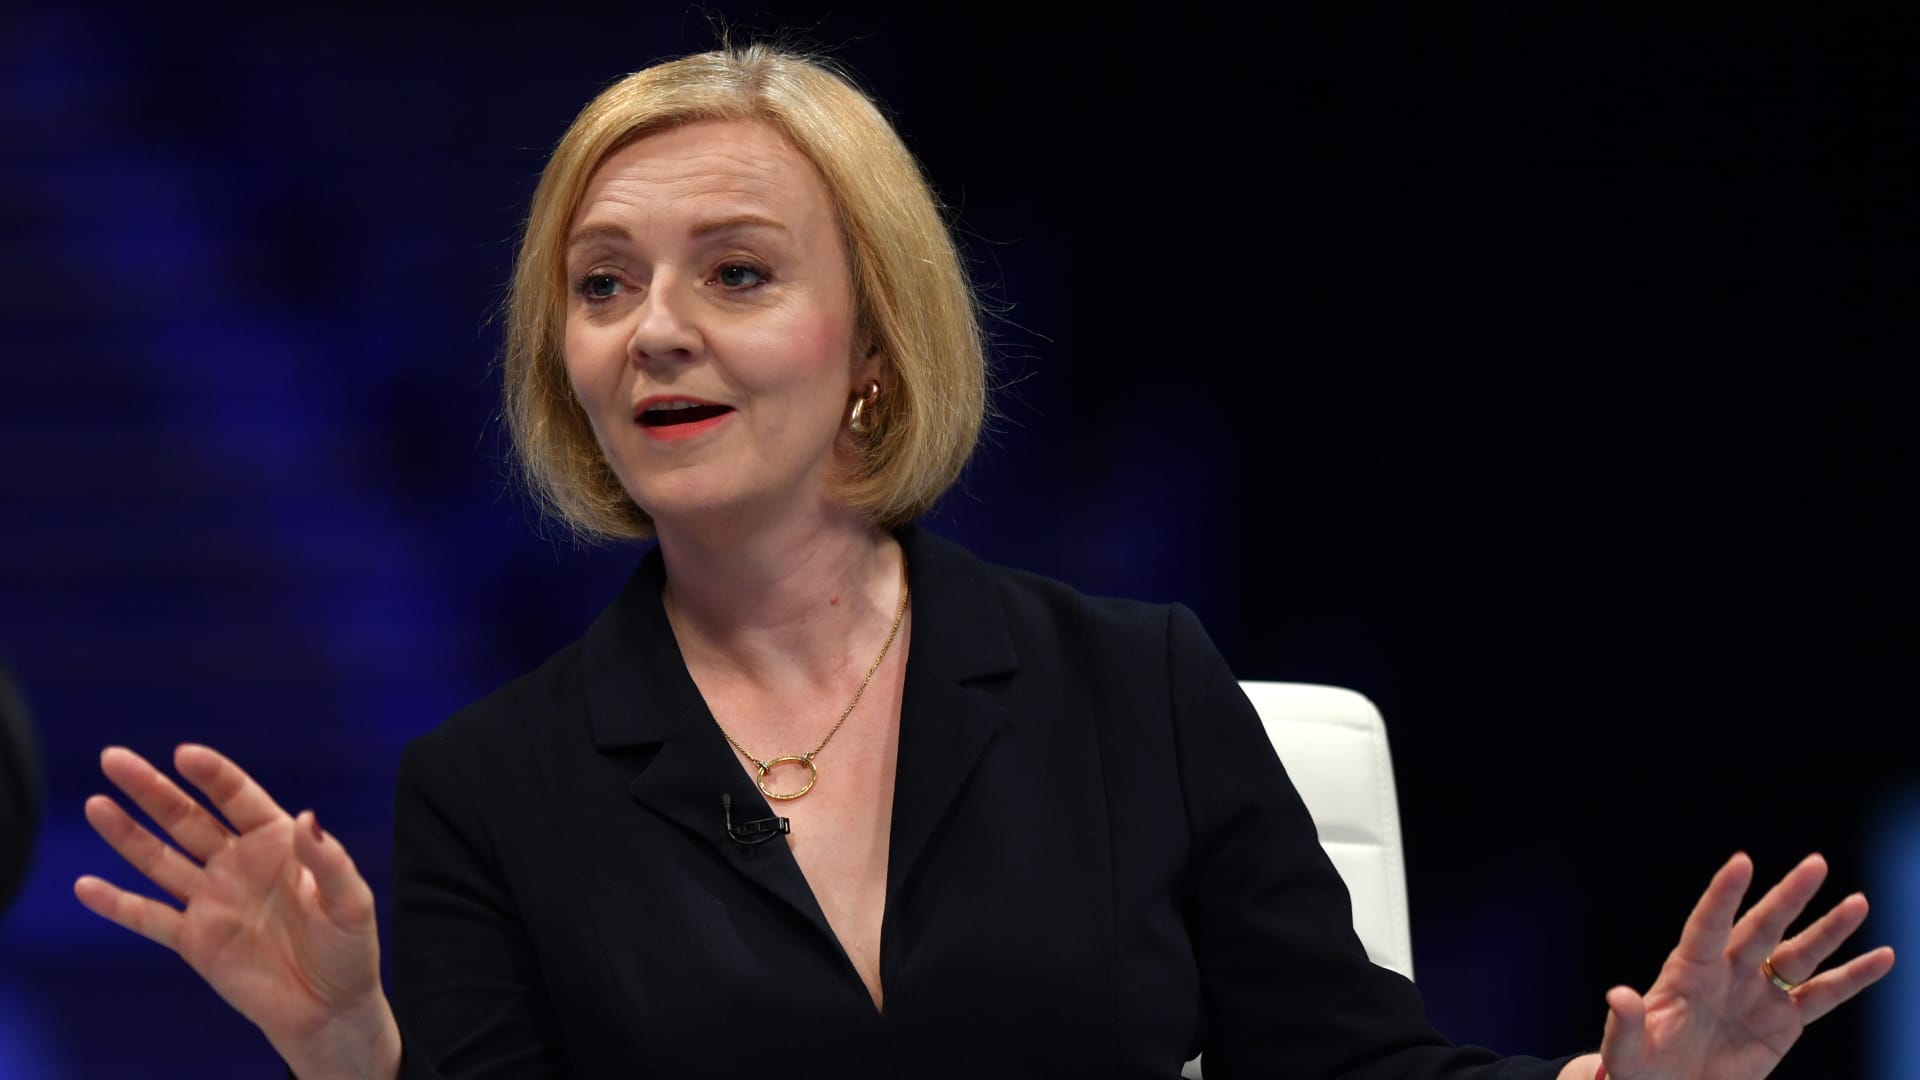 Liz Truss desires to overview the Financial institution of England’s mandate